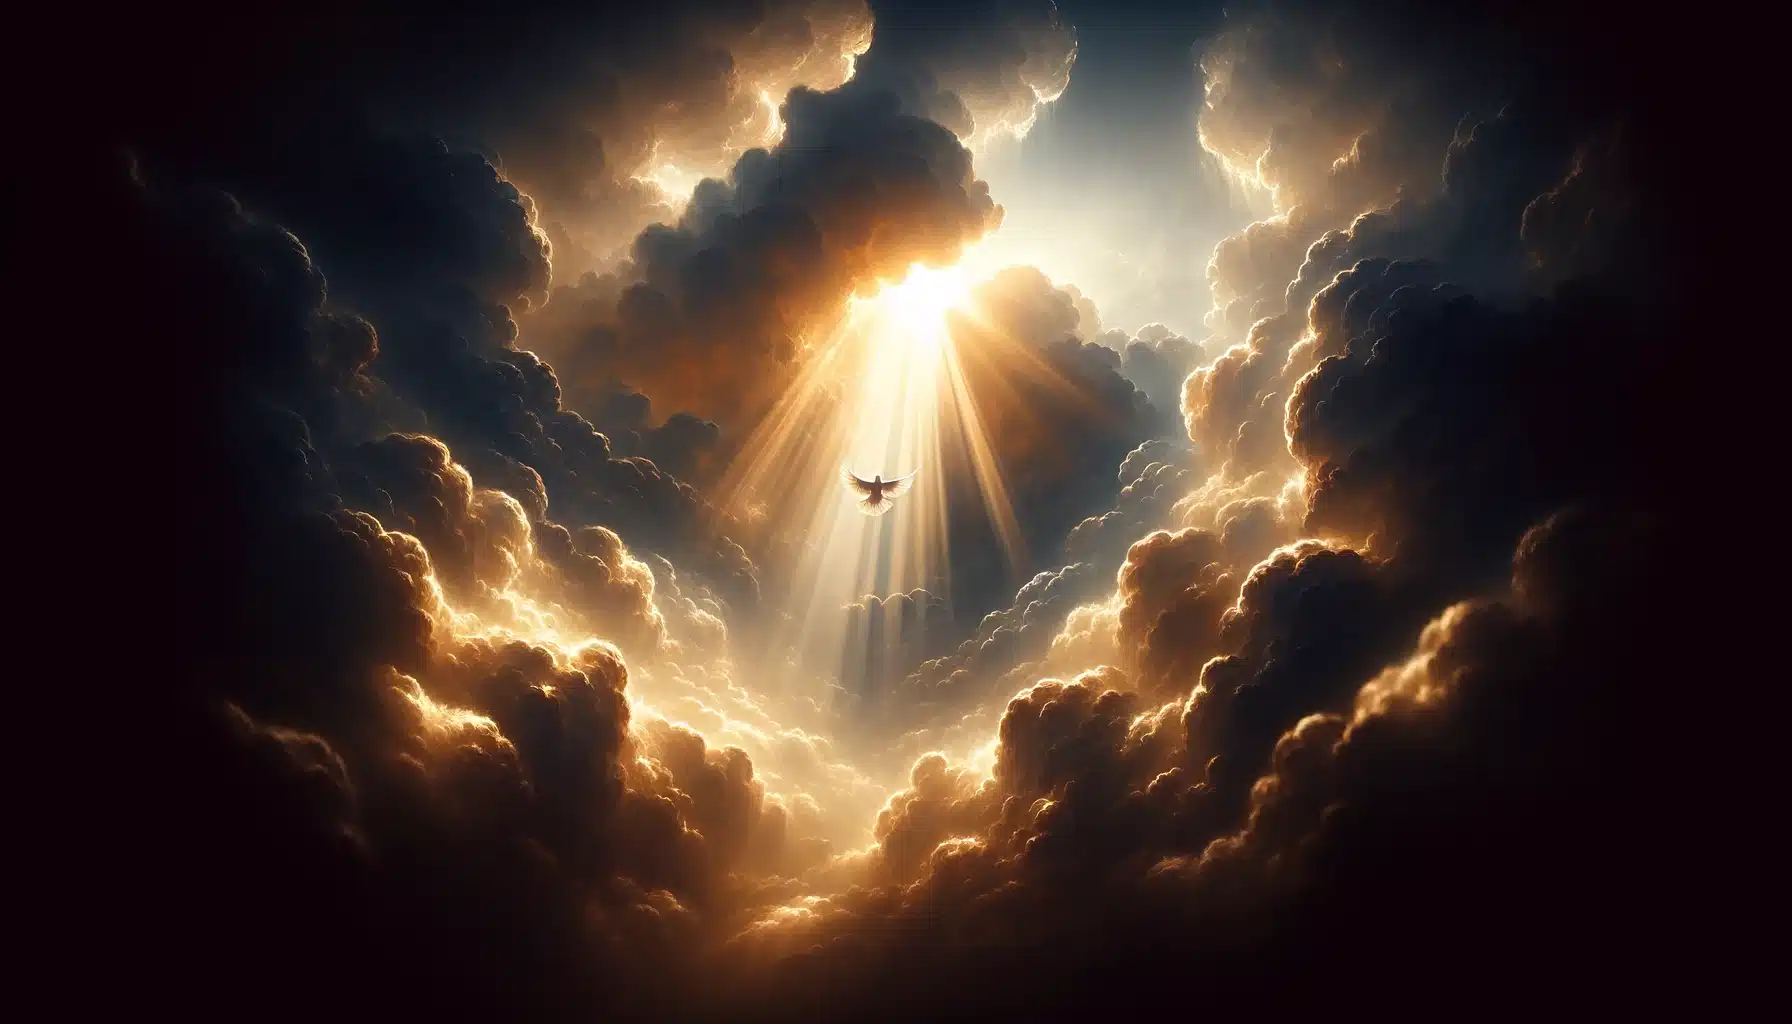 DALL·E 2024-02-14 07.49.58 – Design a 16_9 image where a brilliant, divine light breaks through the clouds, at the heart of which the dim silhouette of a dove can be faintly disce